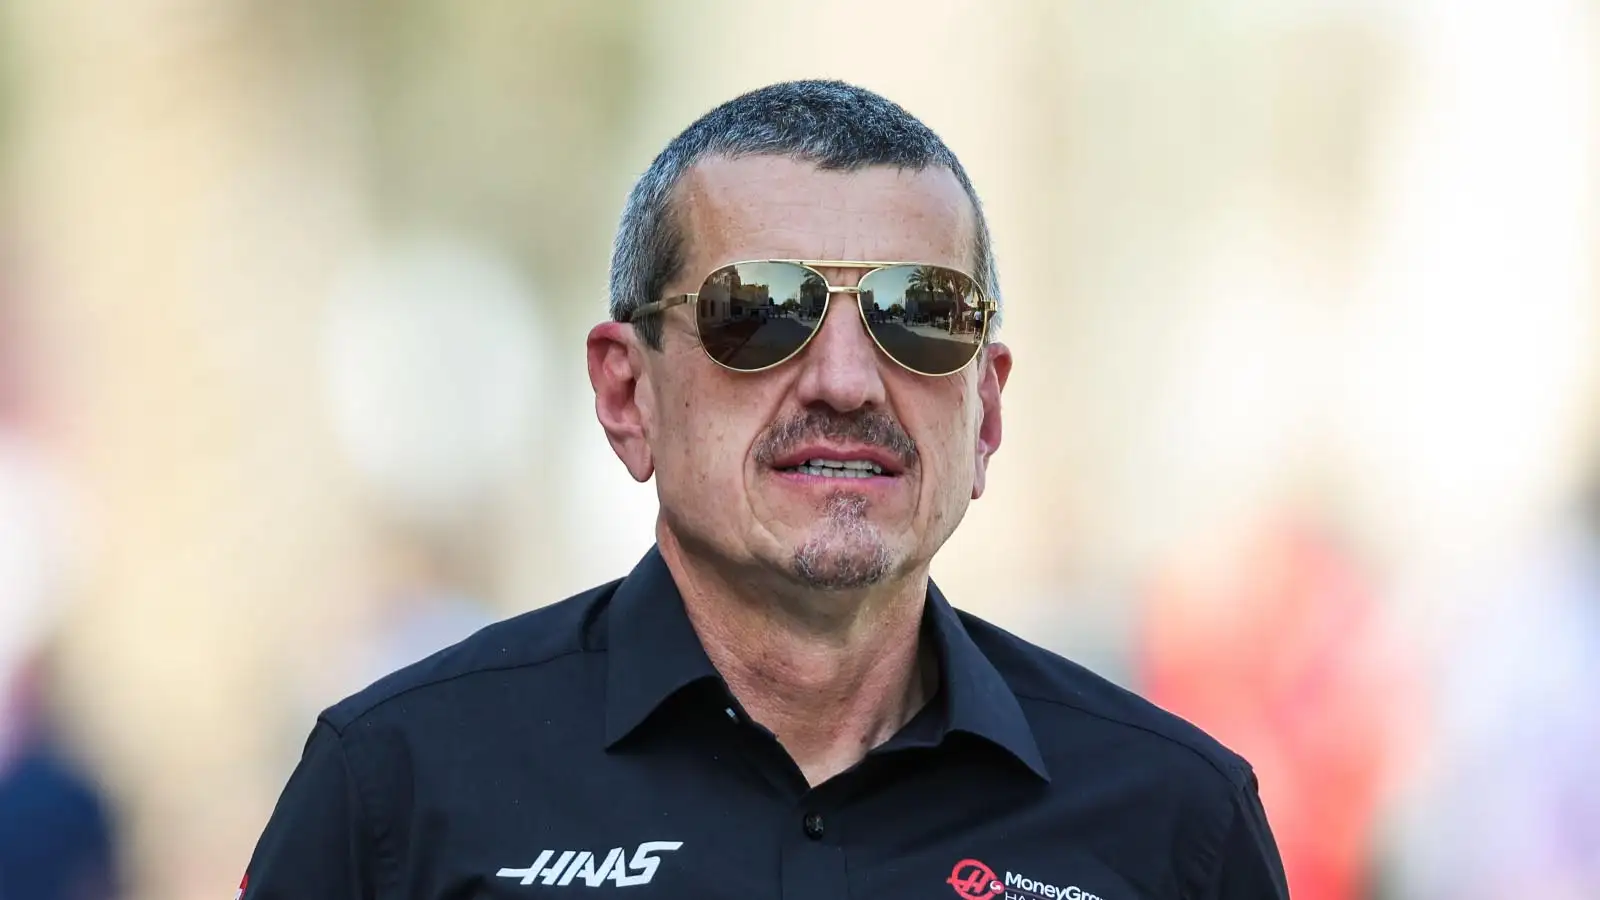 Former Haas team principal Guenther Steiner walks through the F1 paddock in Bahrain.